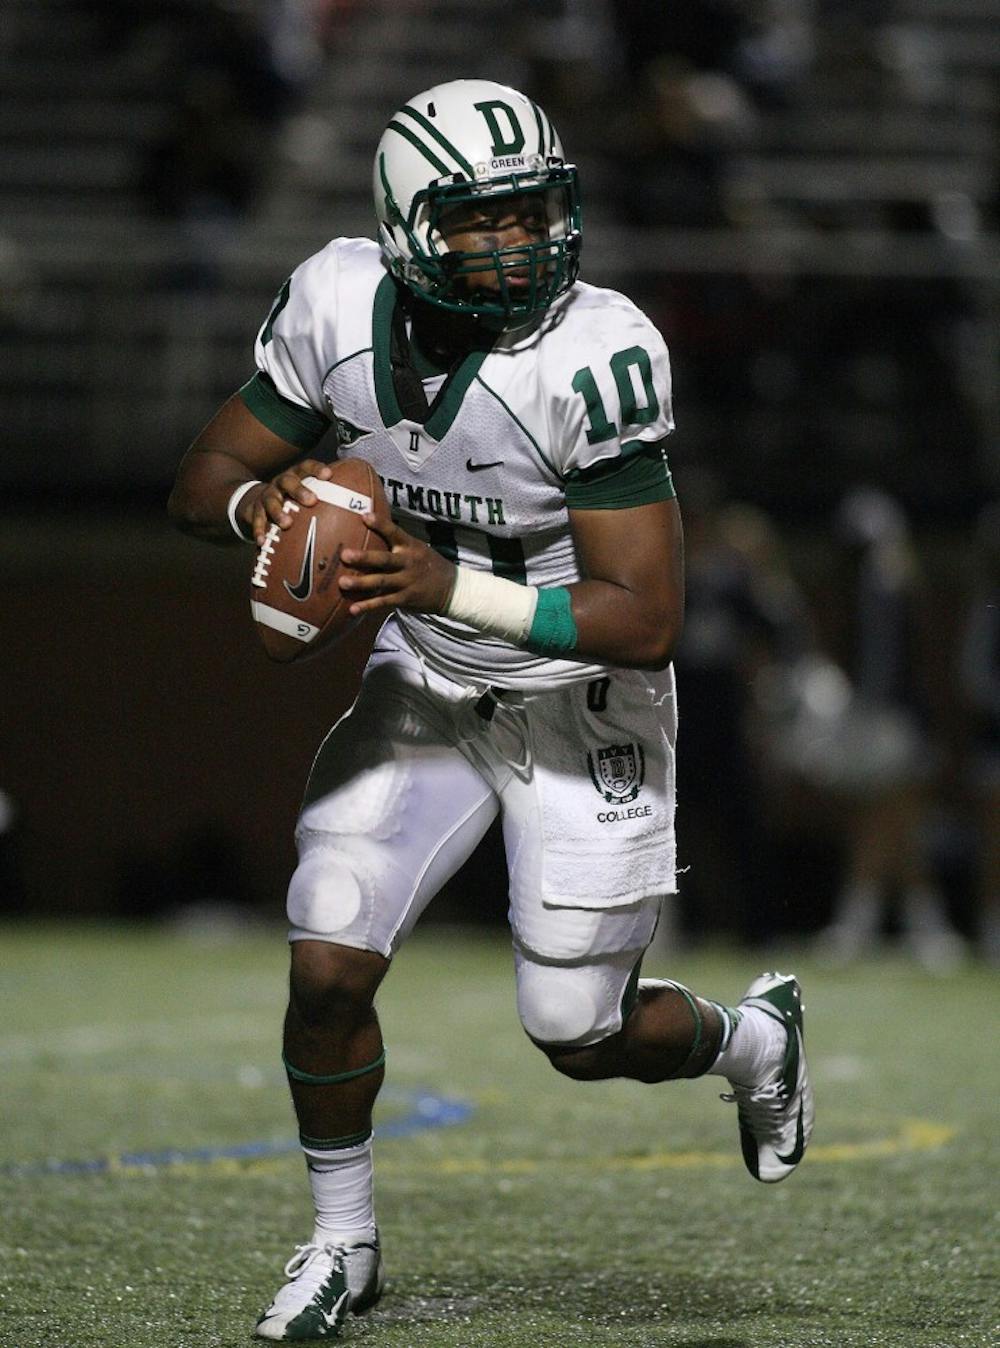 Dartmouth junior quarterback Dalyn Williams dominated Penn football, leading the Big Green to an easy victory on Saturday afternoon.